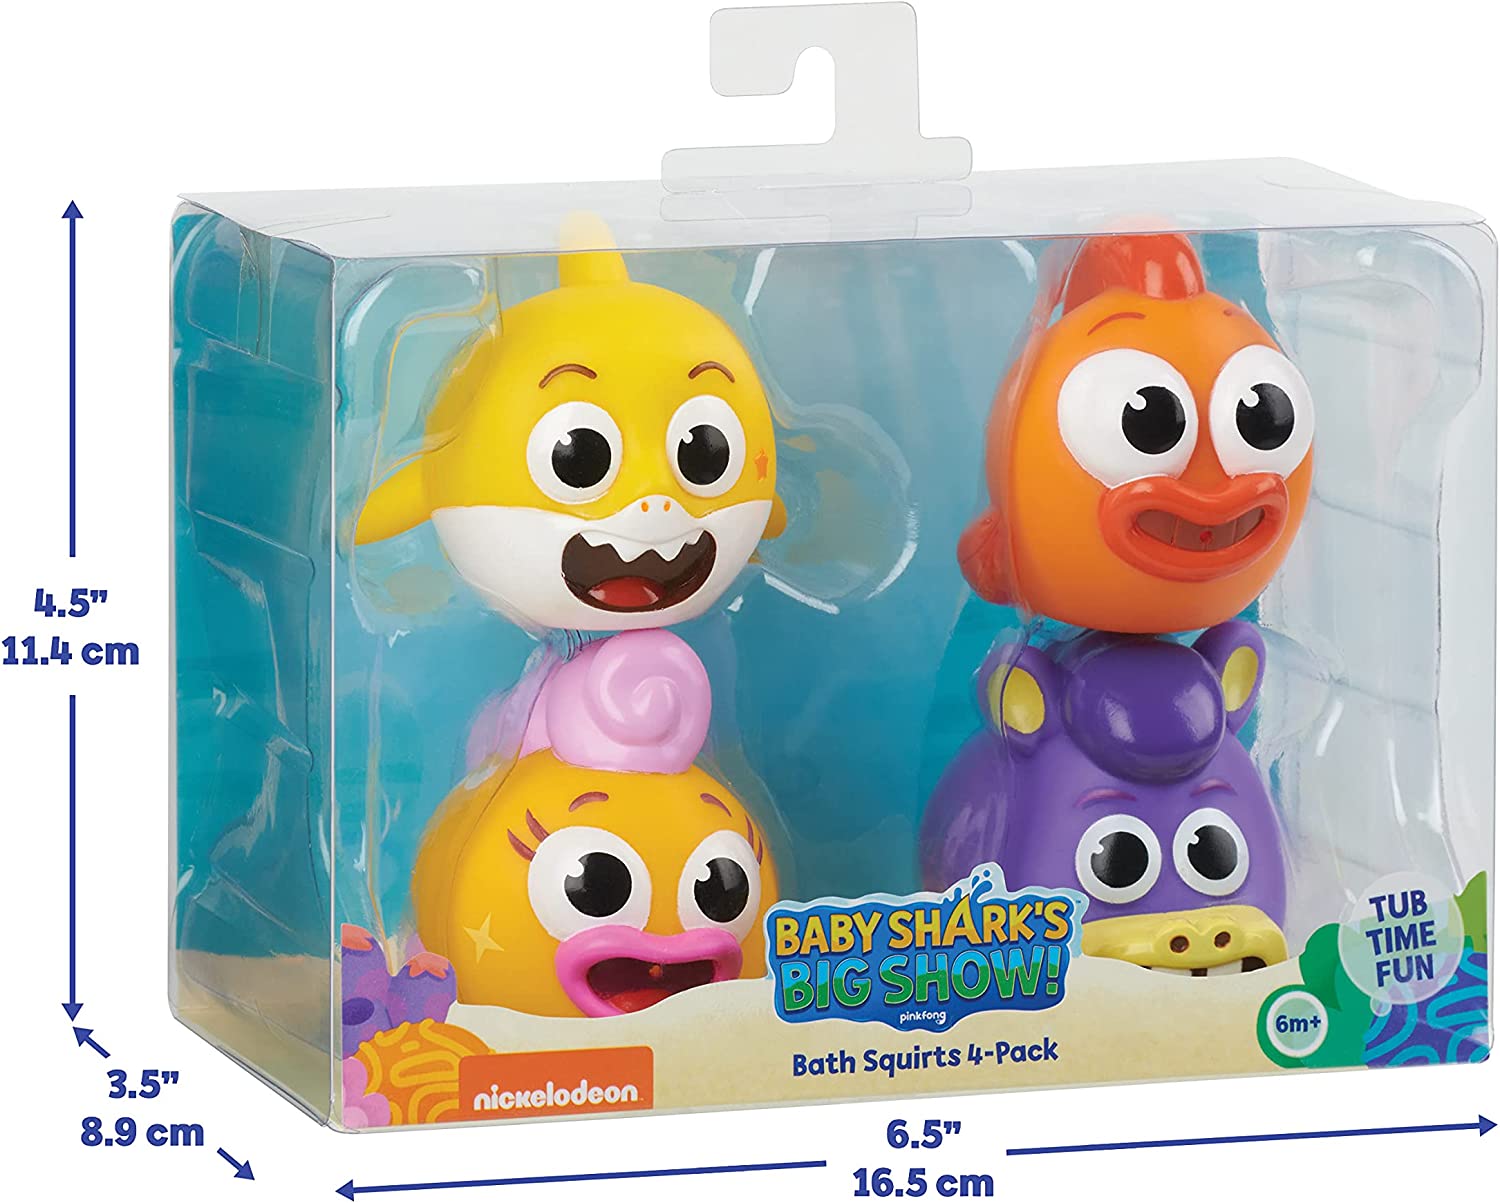 Baby Shark Bath Squirt Toy 4-Pack Big Show! | Operation Imagination